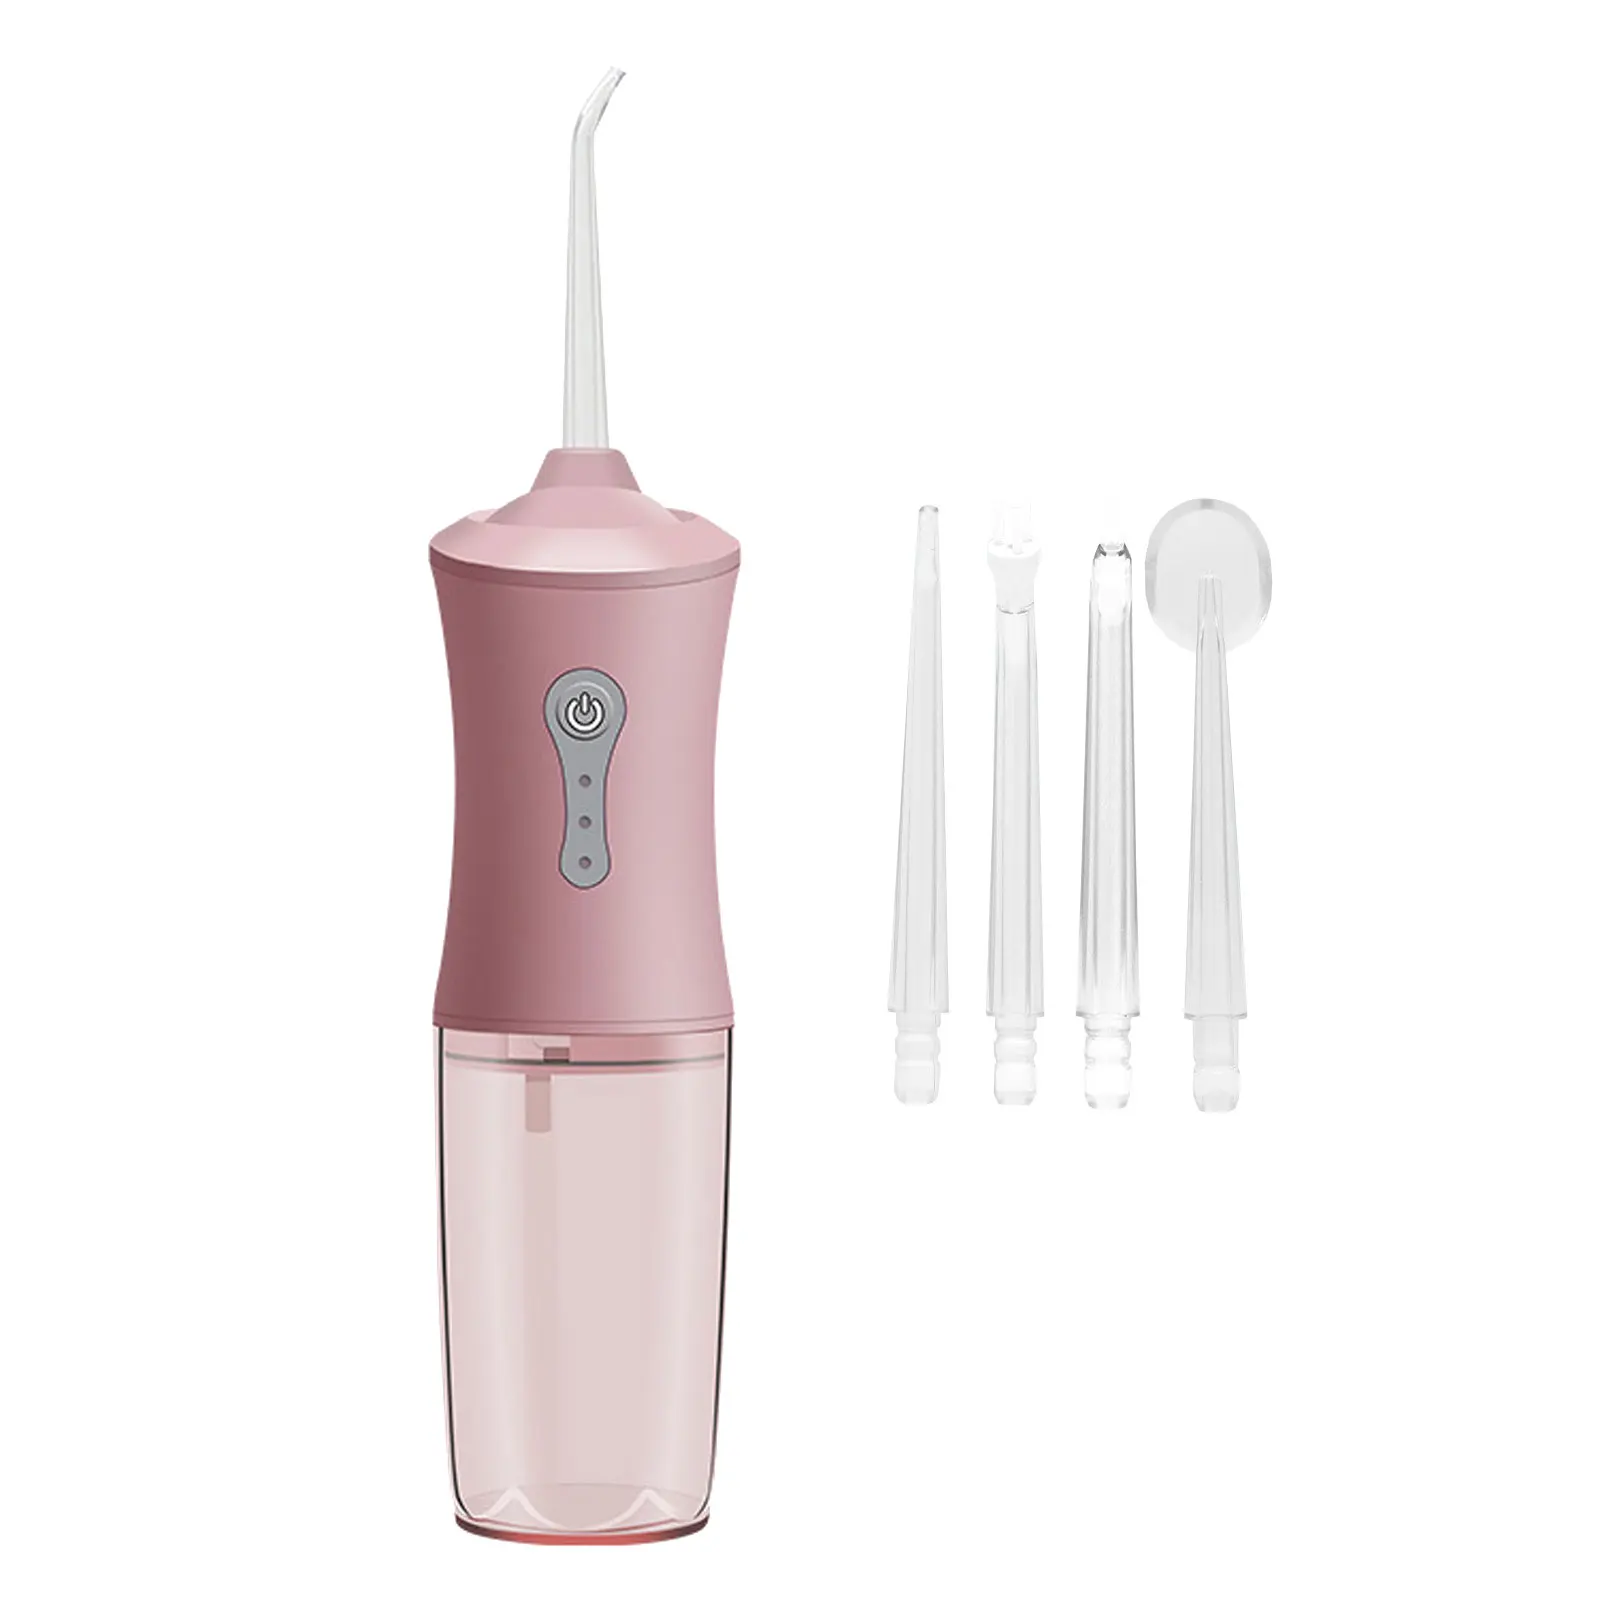 

Oral Dental Irrigator Portable Water Flosser USB Rechargeable 3 Modes IPX7 240ML Water Tank For Cleaning Teeth 4 Cleaning Nozzle